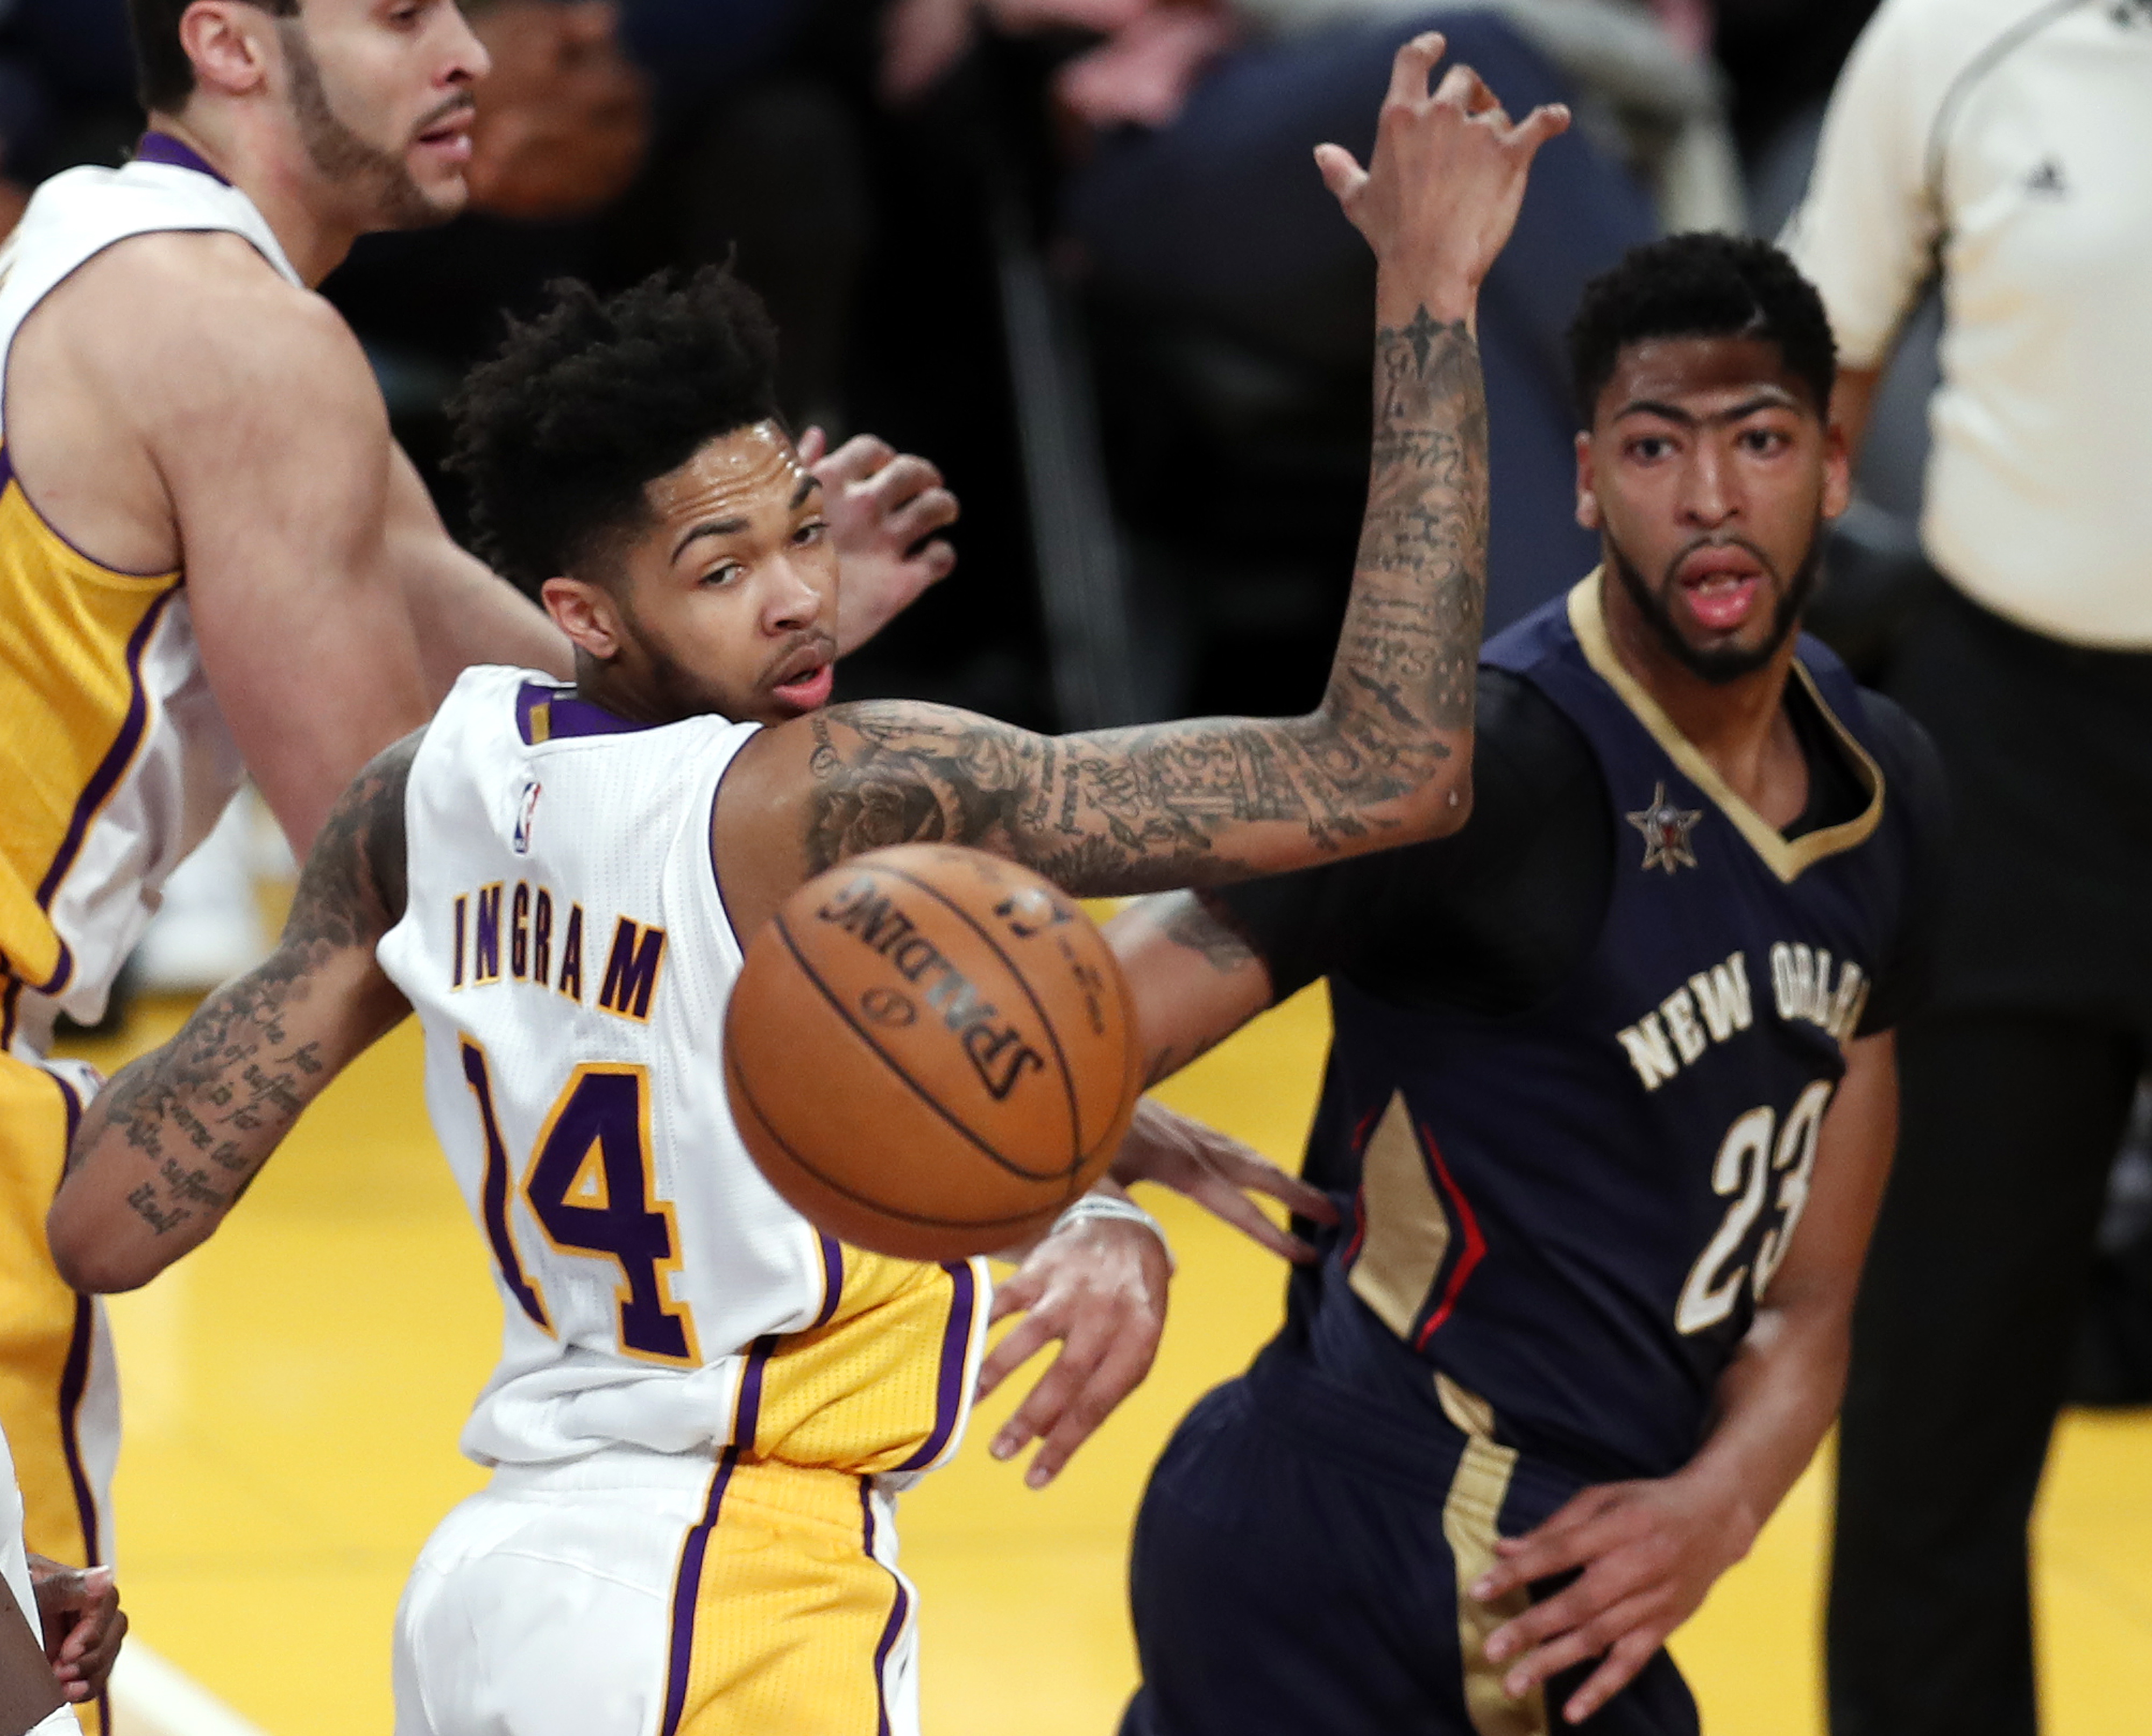 epa07650960 (FILE) - New Orleans Pelicans forward Anthony Davis (R) passes by the ball as he is defended by Los Angeles Lakers forward Brandon Ingram (L) in the first half of their NBA game at Staples Center in Los Angeles, California, USA, 05 March 2017. According to reports Davis was traded for Lonzo Ball, Brandon Ingram, Josh Hart, and three first-round picks – including the No. 4 overall in 2019 Draft.  EPA/MIKE NELSON  SHUTTERSTOCK OUT *** Local Caption *** 53371243